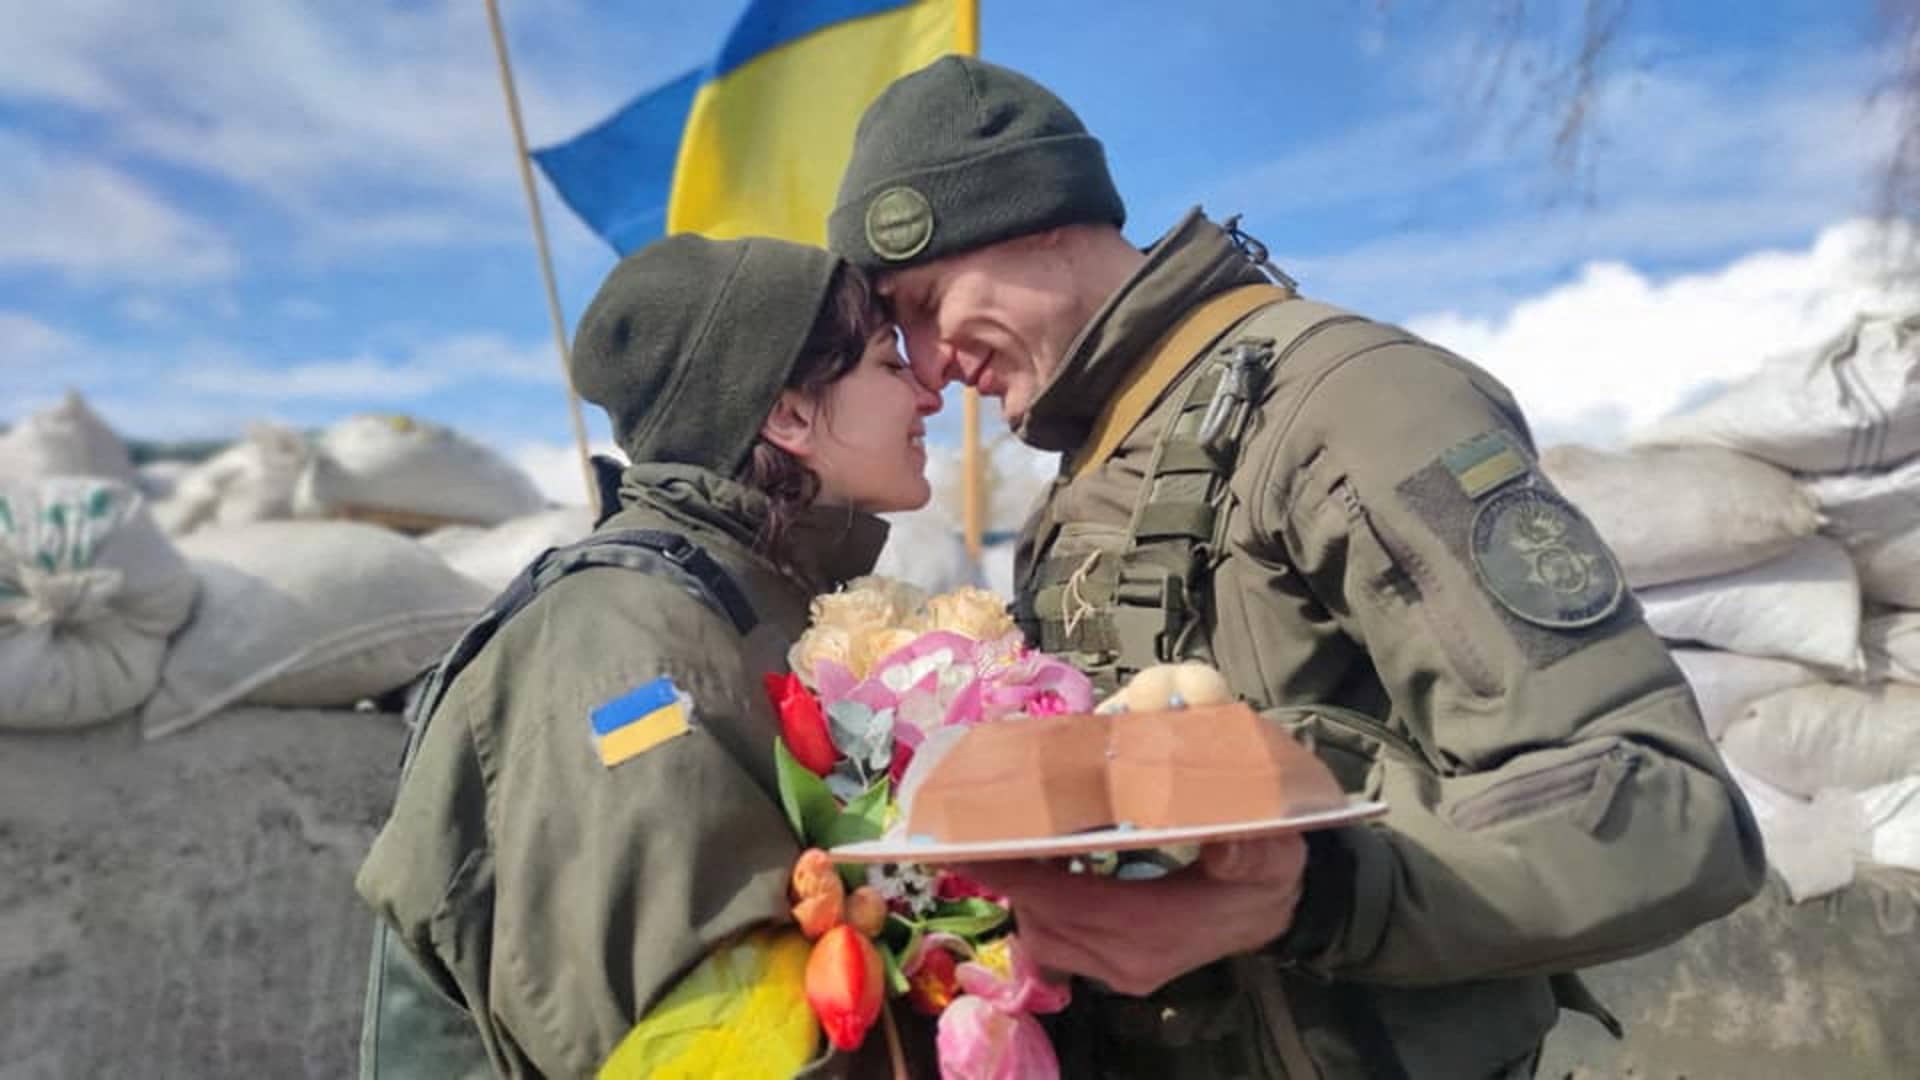 Members of the National Guard of Ukraine Oleksandr and Olena react at their wedding during Ukraine-Russia conflict, at a checkpoint in unknown location, in Ukraine, in this handout picture released March 8, 2022.